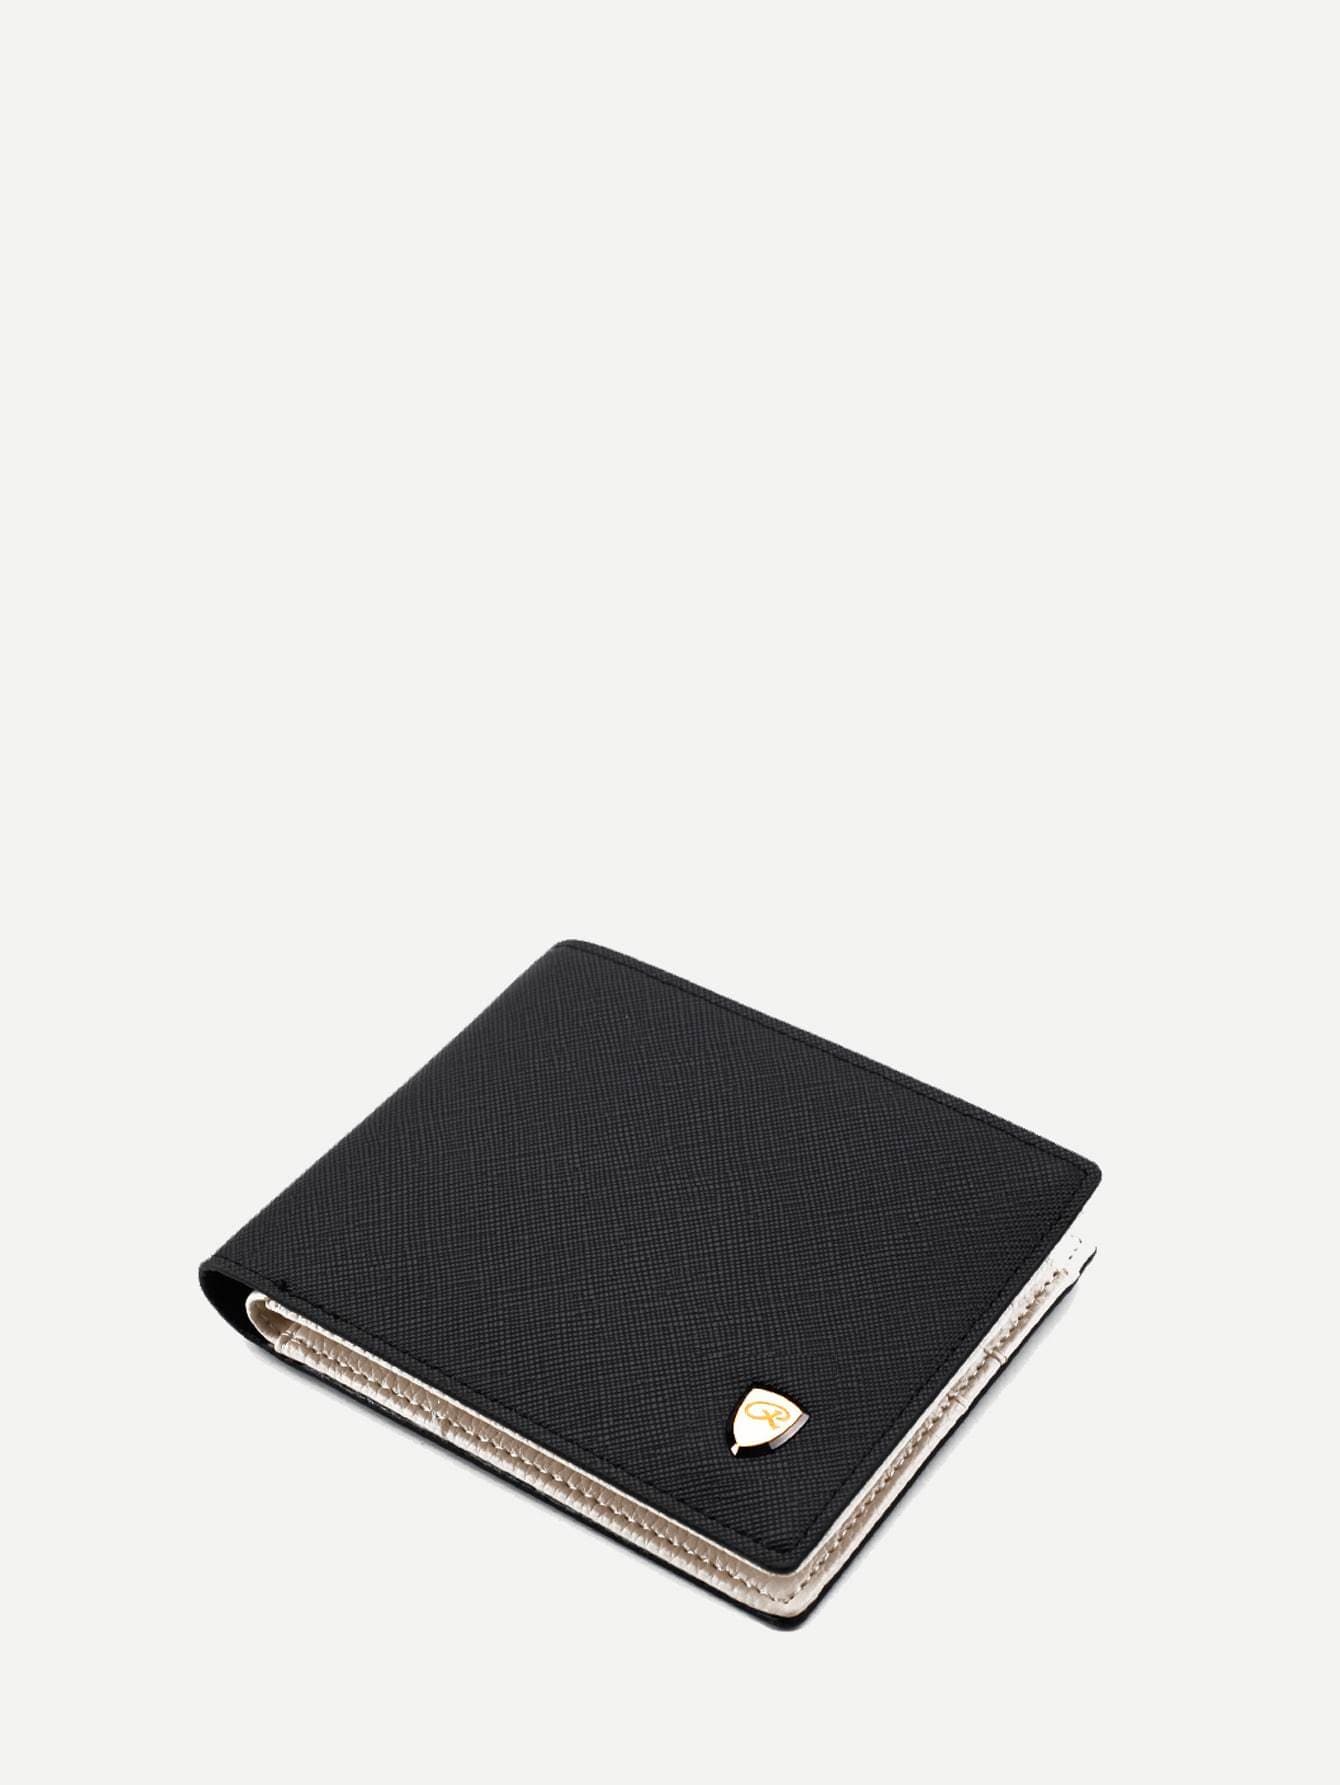 PU Leather Black Fold Over Wallet With Card Slot